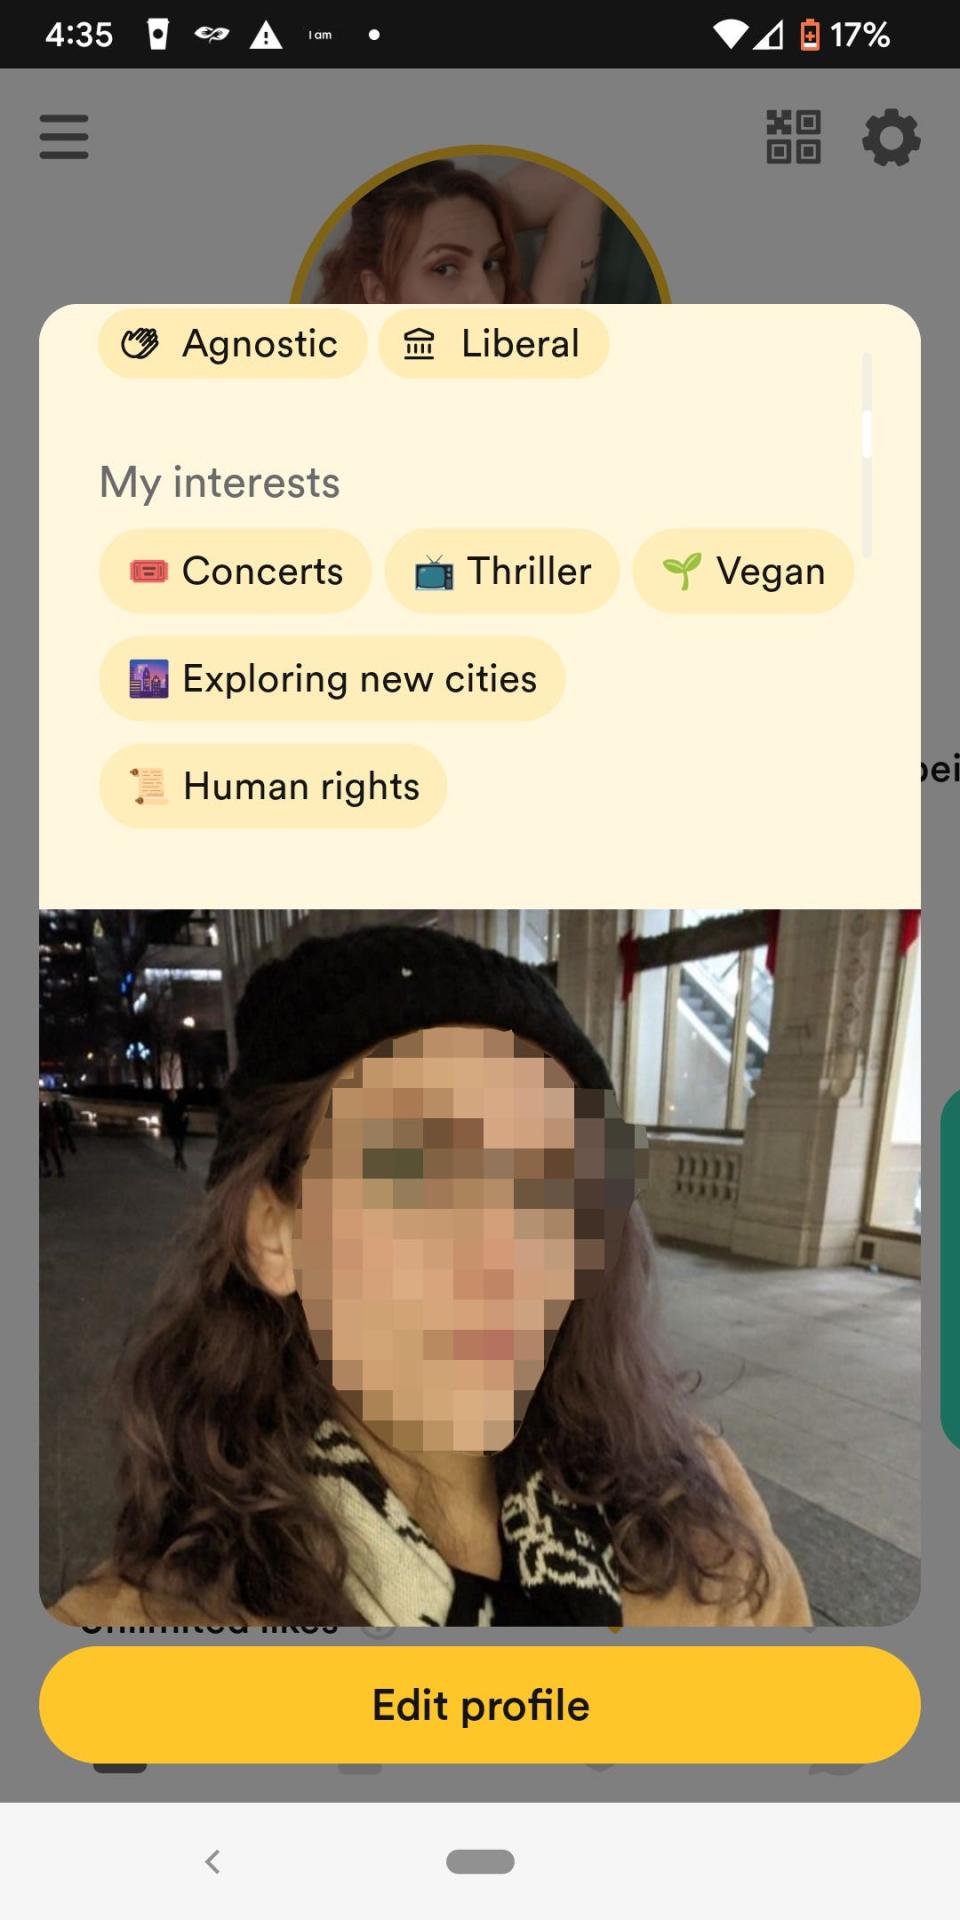 A screenshot of a person's dating profile.